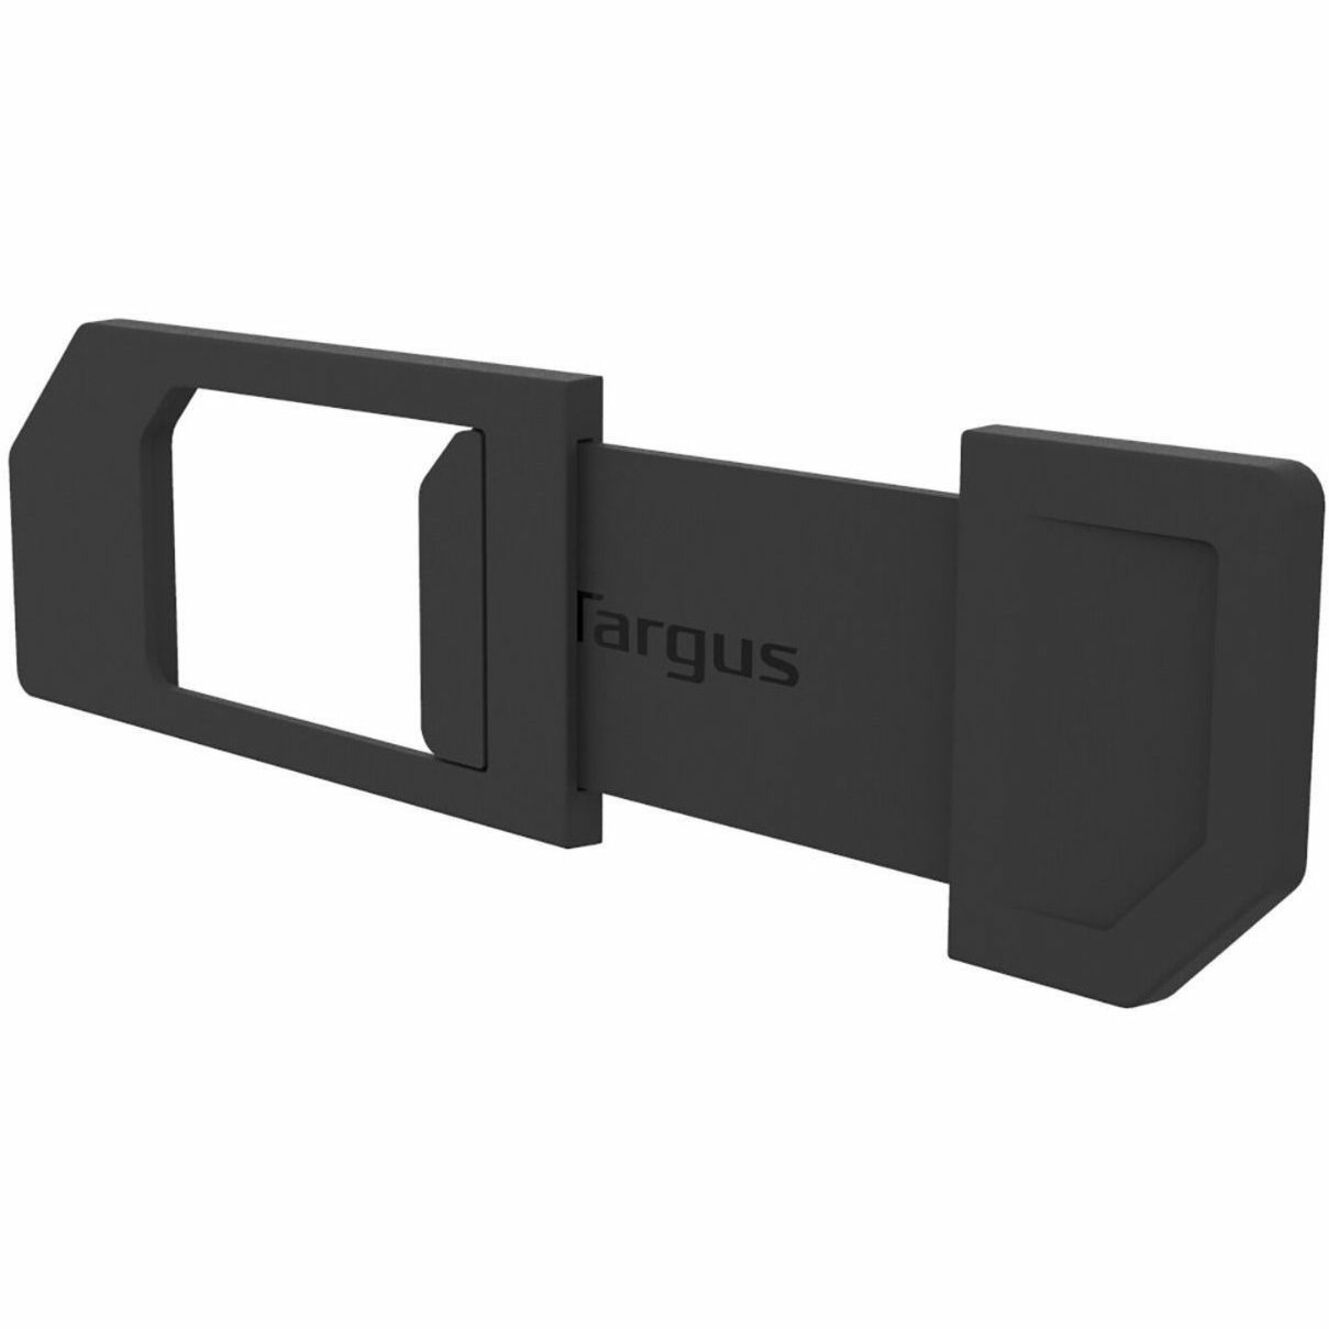 Targus AWH011US Webcam Cover, 1 Pack, Black - Protect Your Privacy